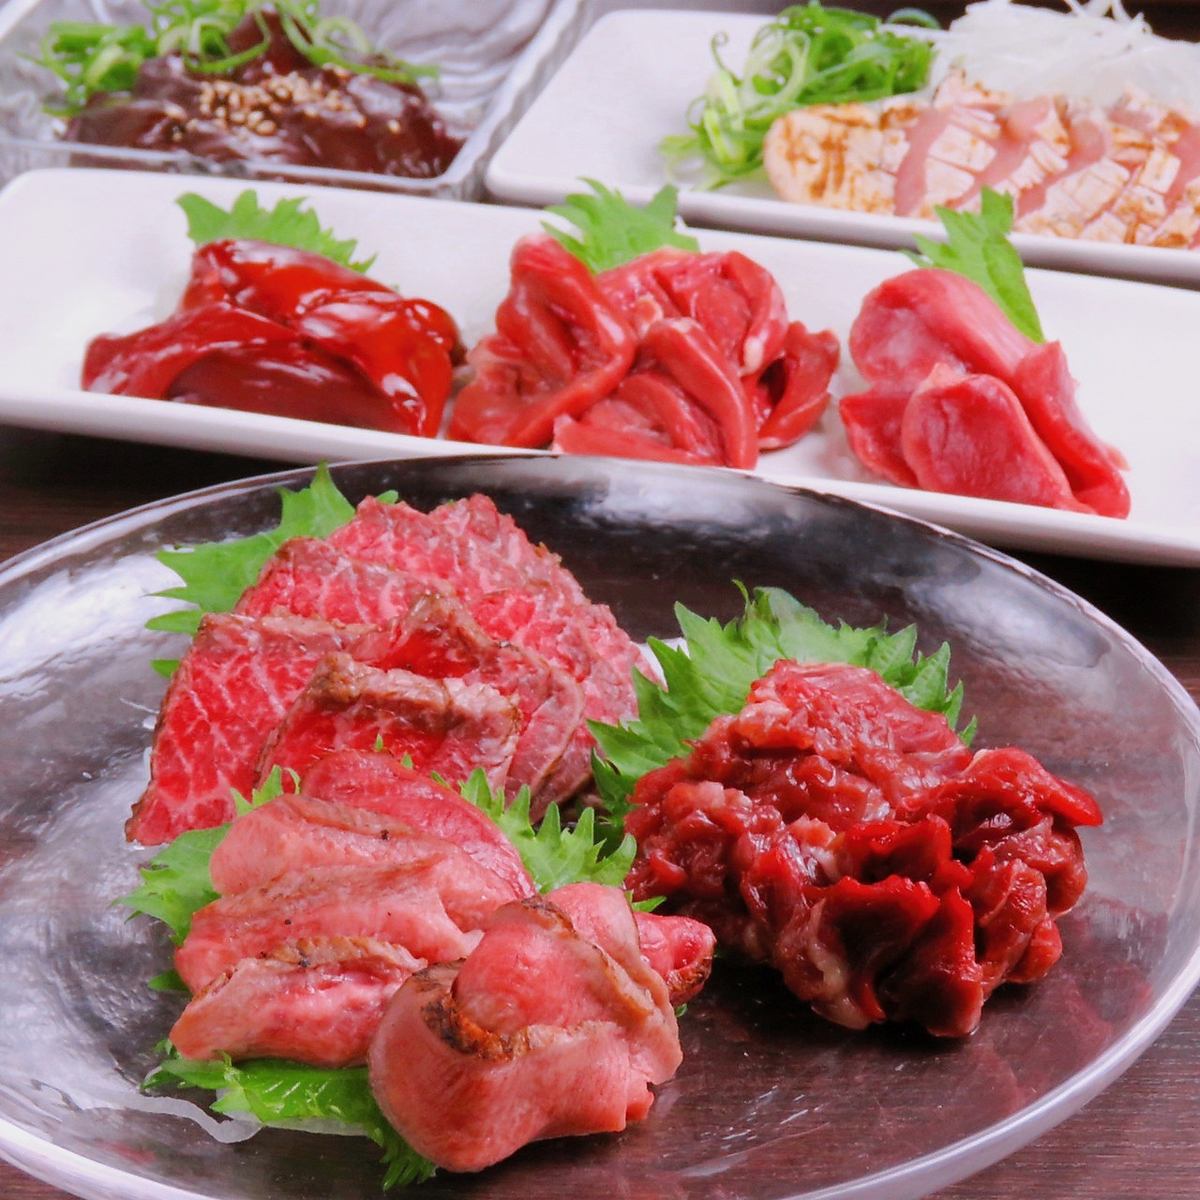 In addition to our carefully selected free-range chicken, we also offer horse sashimi, tongue sashimi, and beef sashimi.